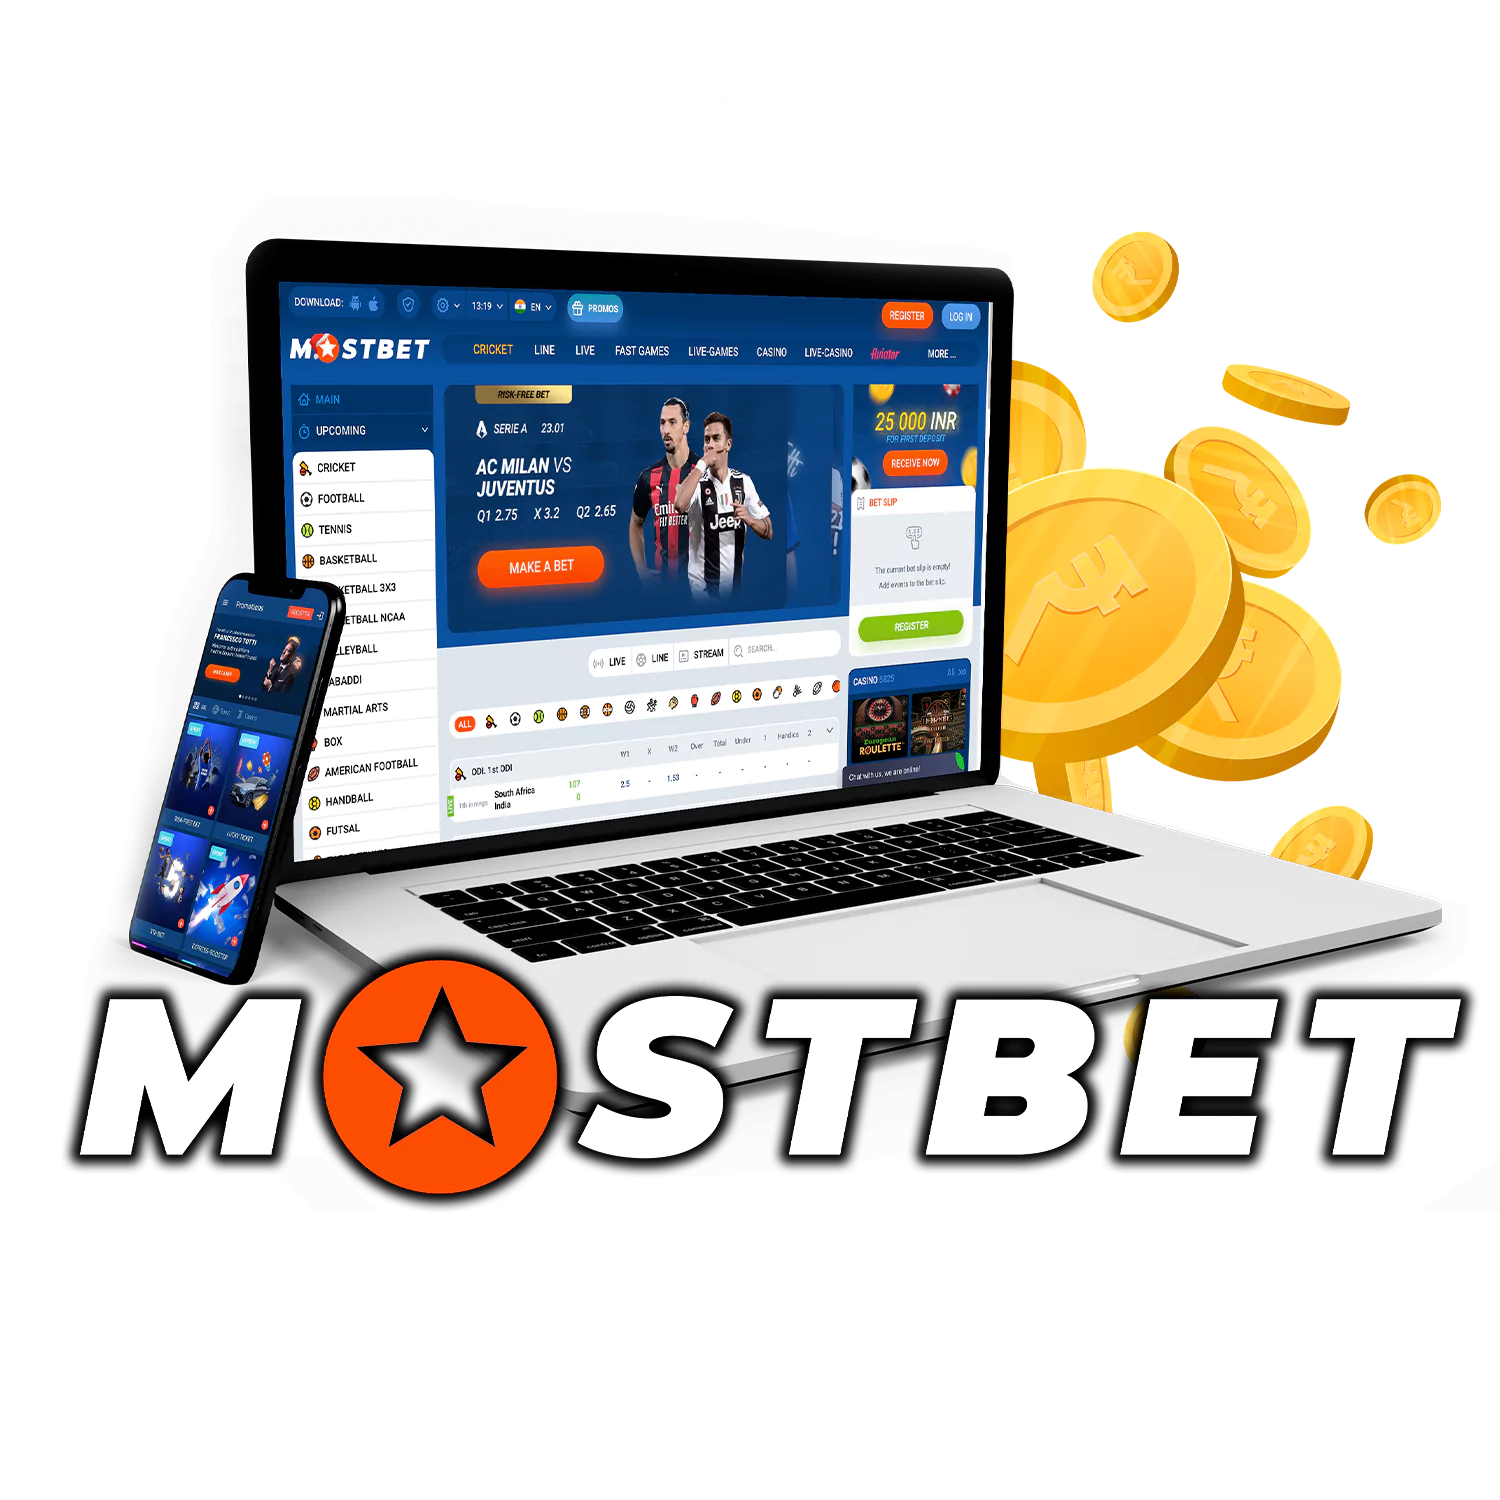 Mind Blowing Method On Mostbet Betting Company in Turkey